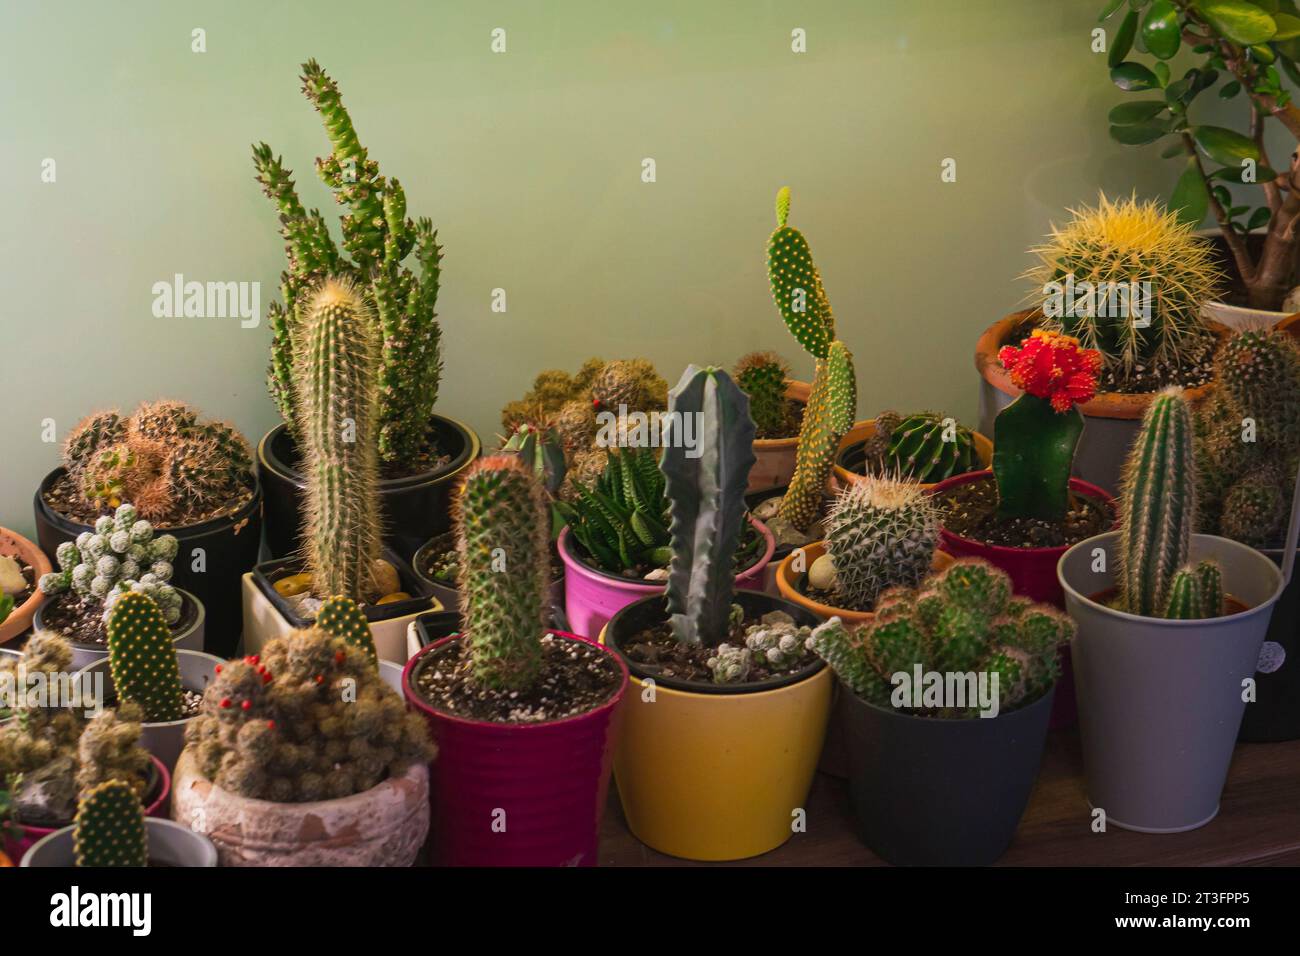 Various Potted Cacti and Succulents - Botanic Garden Oasis Stock Photo